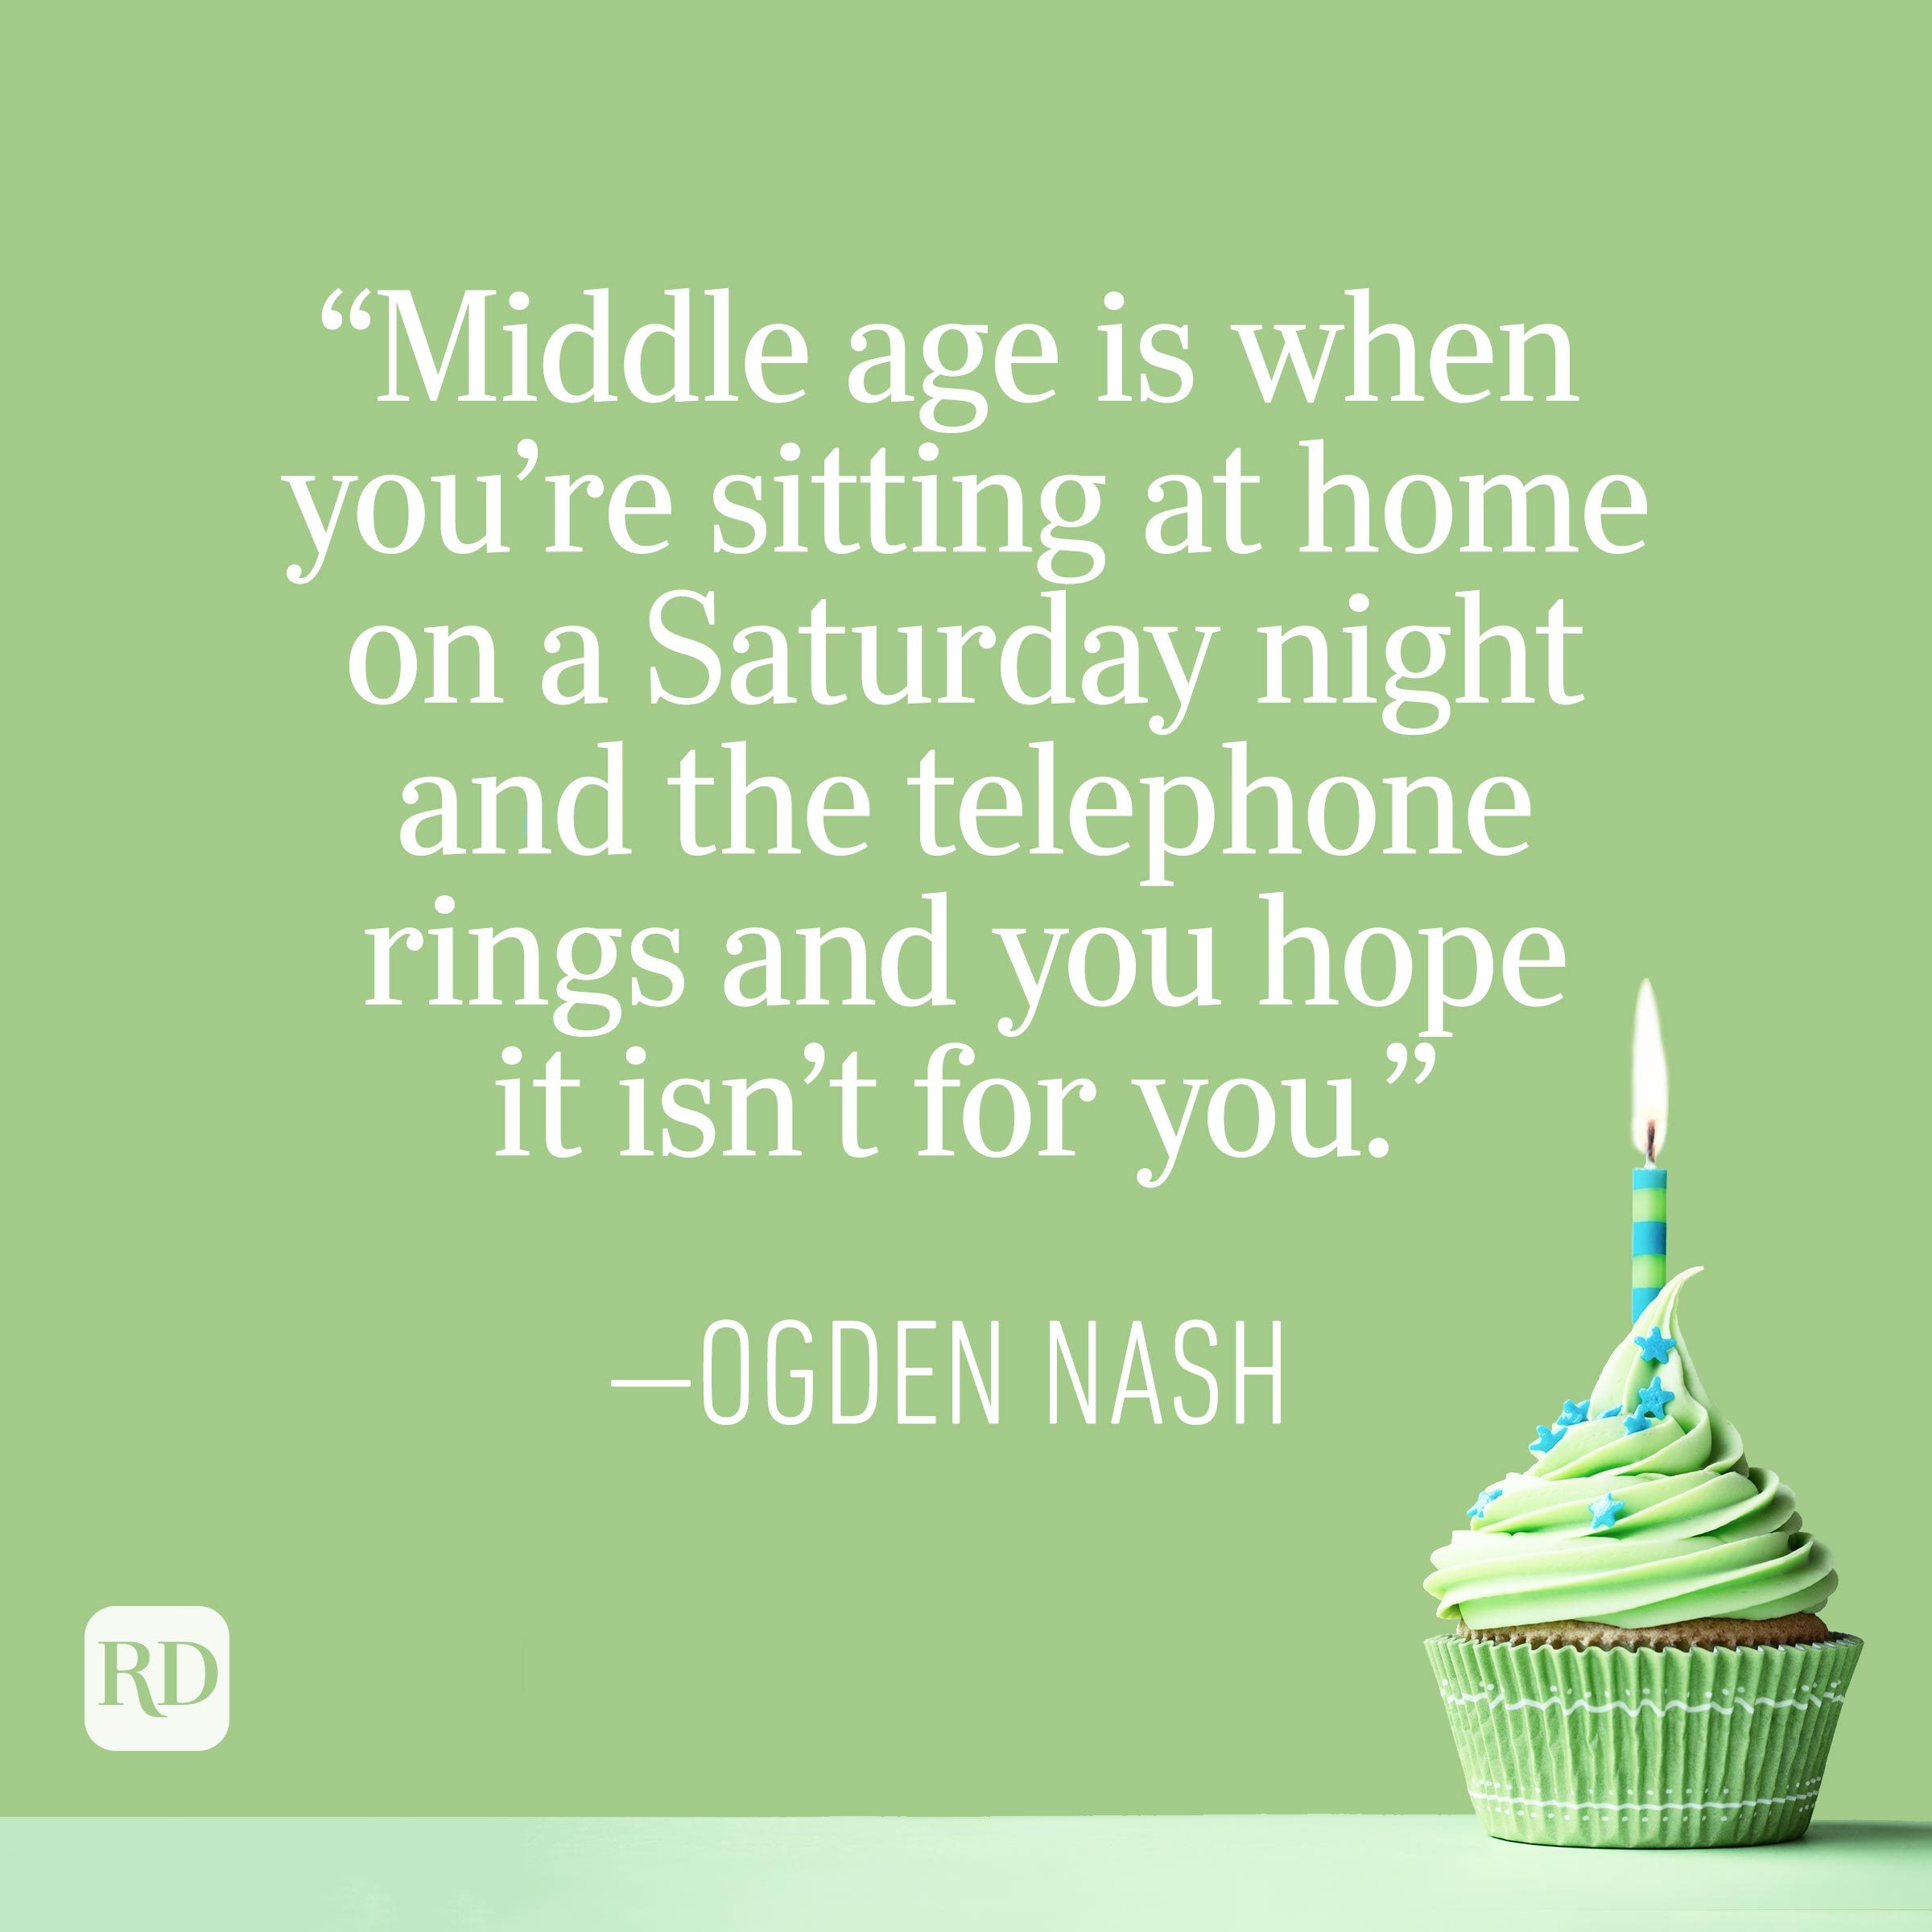 "Middle age is when you're sitting at home on a Saturday night and the telephone rings and you hope it isn't for you." — Ogden Nash